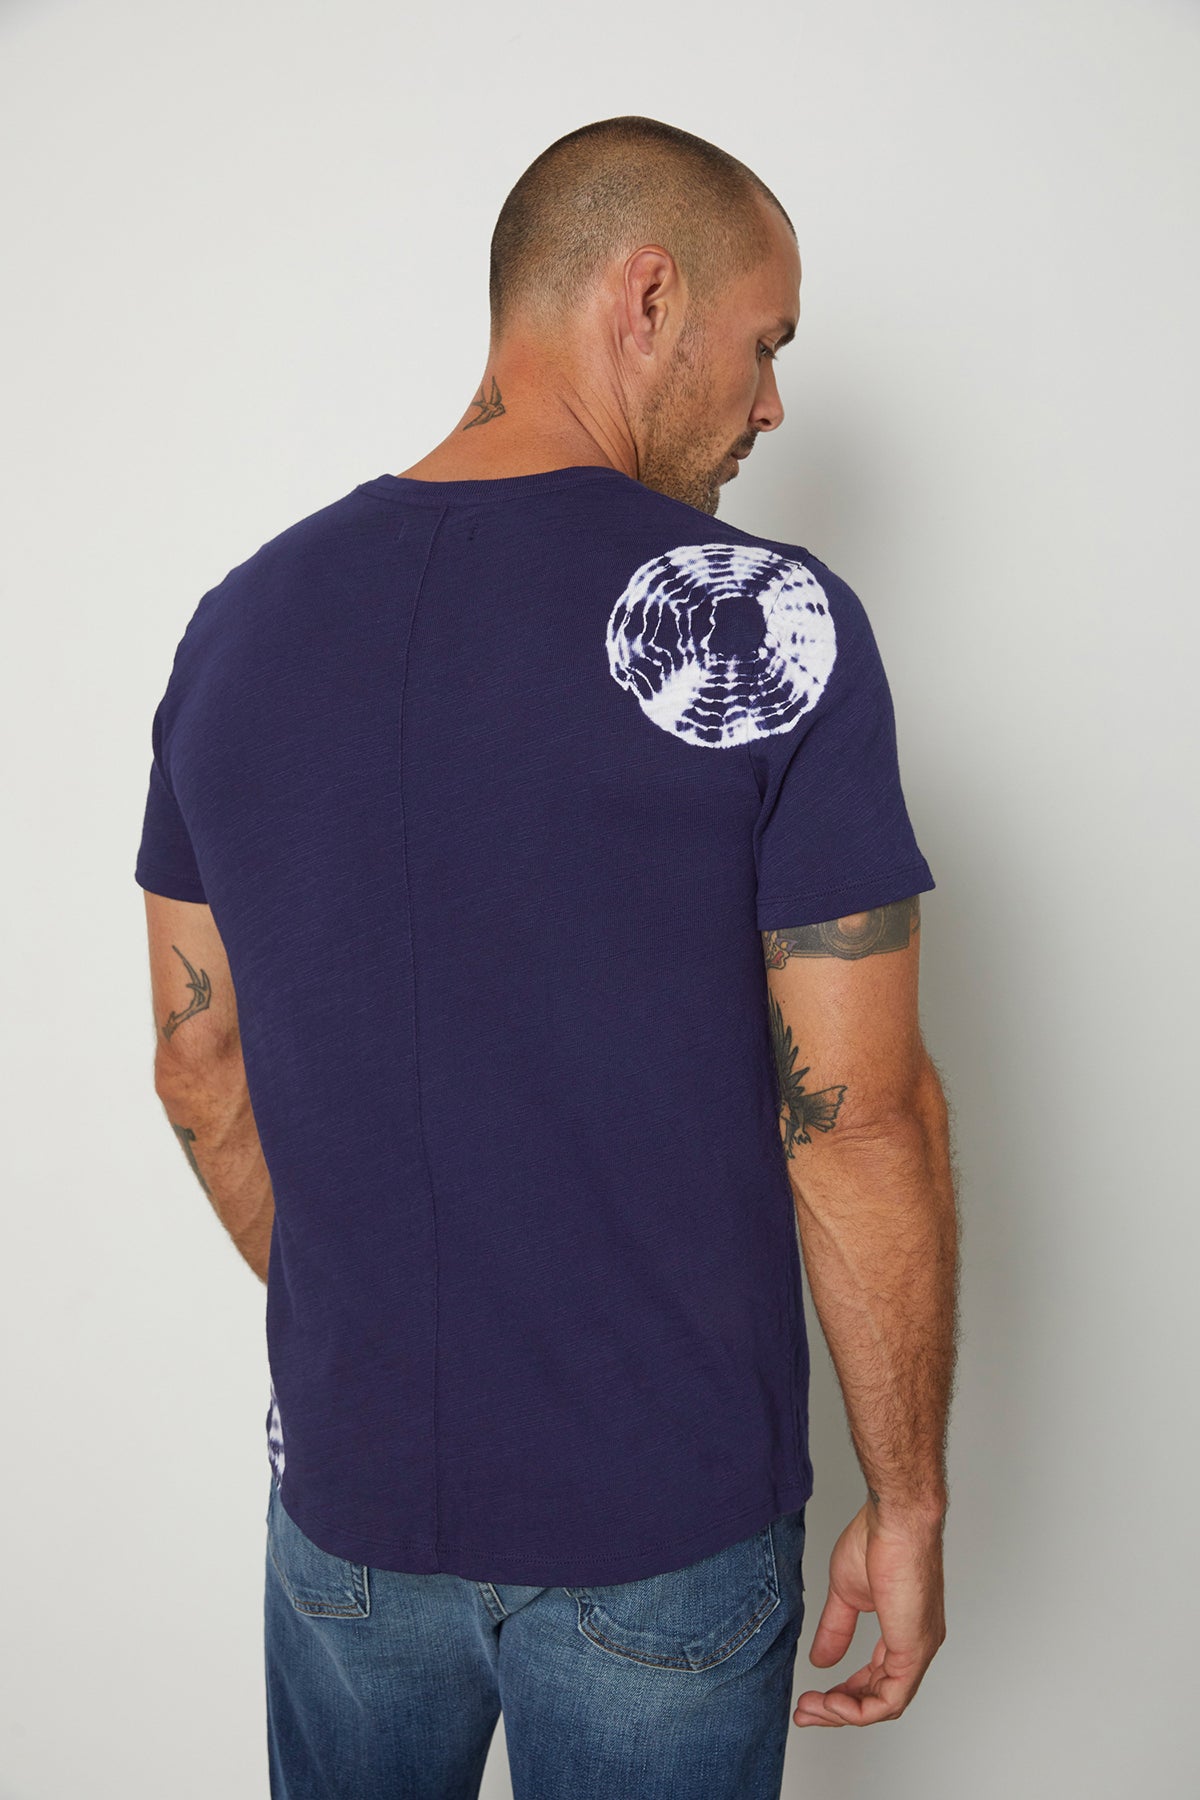 Asher in navy back tee-24148745715905